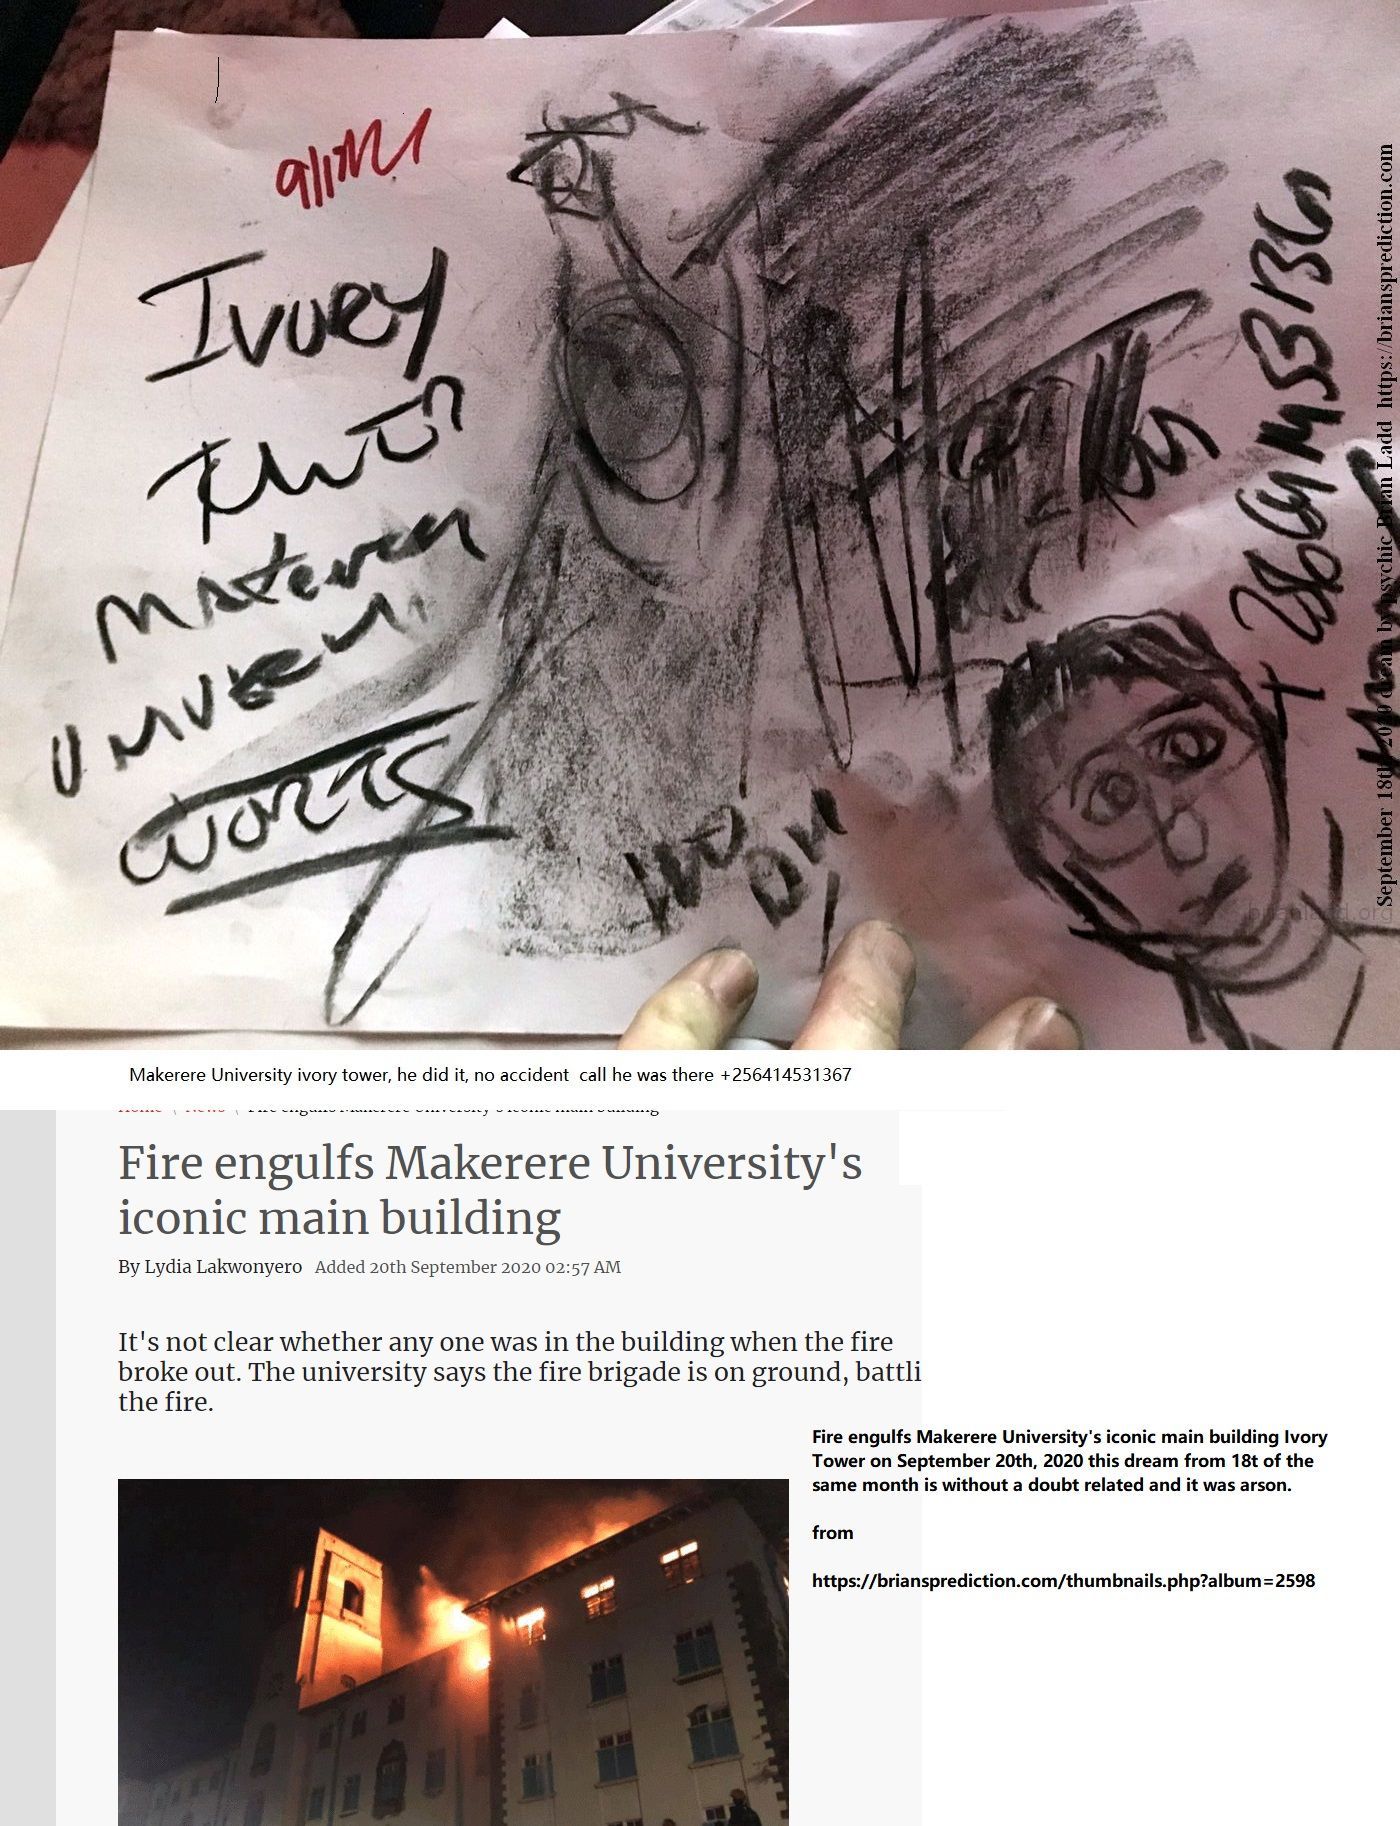 Fire Engulfs Makerere Universitys Iconic Main Building Ivory Tower On September 20Th 2020 This Dream From 18Ht Of The Sa...
Fire Engulfs Makerere University'S Iconic Main Building Ivory Tower On September 20th, 2020 This Dream From 18ht Of The Same Month Is Without A Doubt Related And It Was Arson.  From   https://briansprediction.com/Thumbnails.Php?Album=2598  Dream Says  Makerere University Ivory Tower, He Did It, No Accident Call He Was There.
